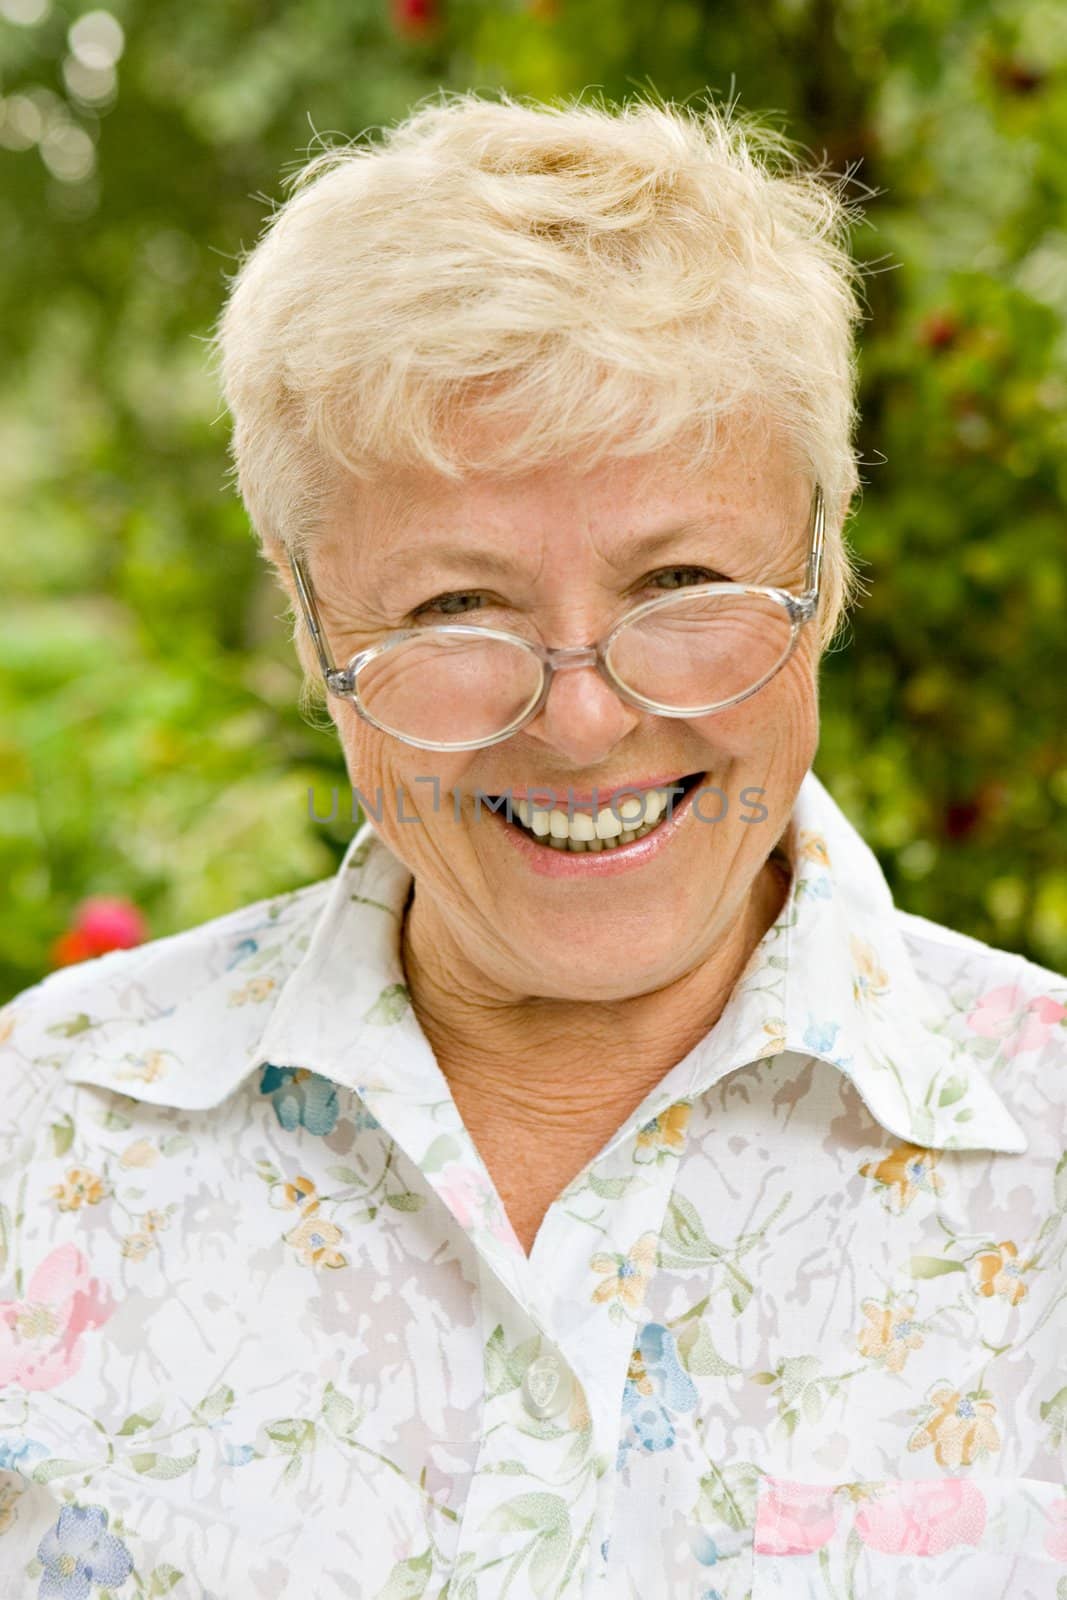 Portrait of the elderly laughing woman in glasses
